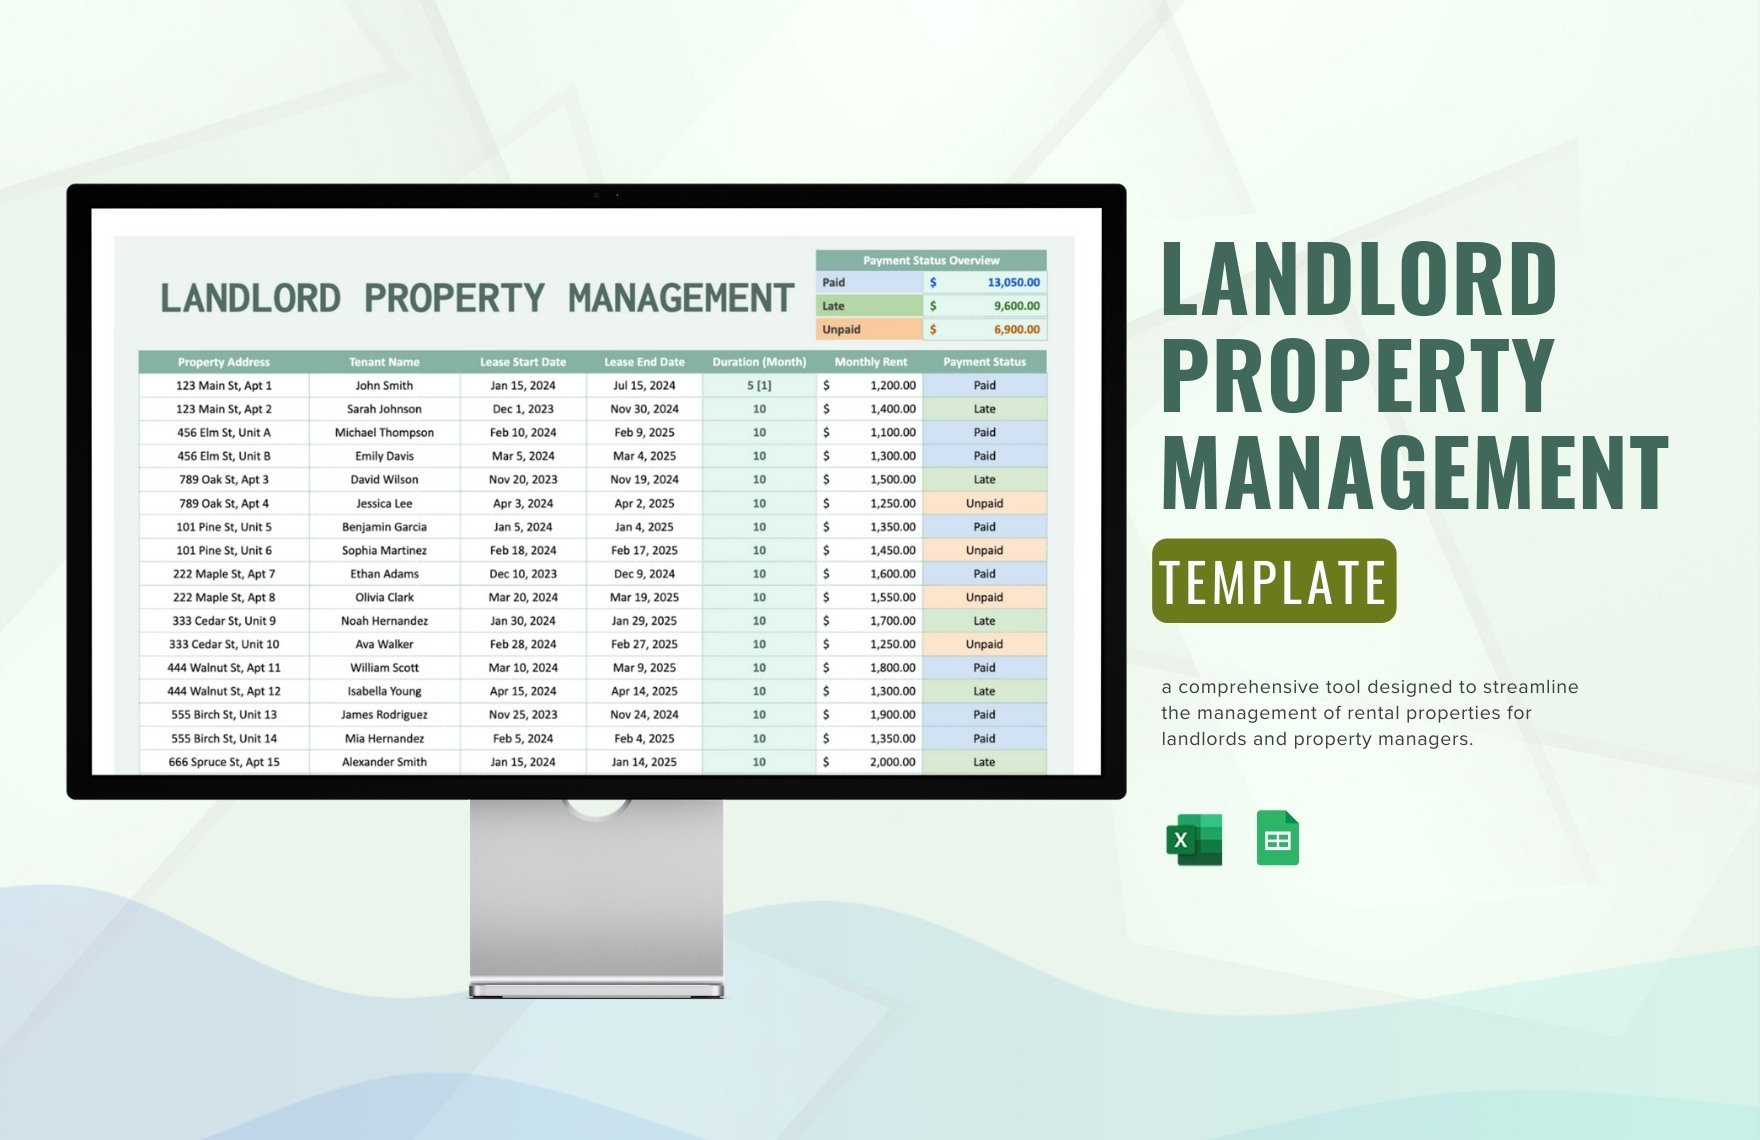 Landlord Property Management Template